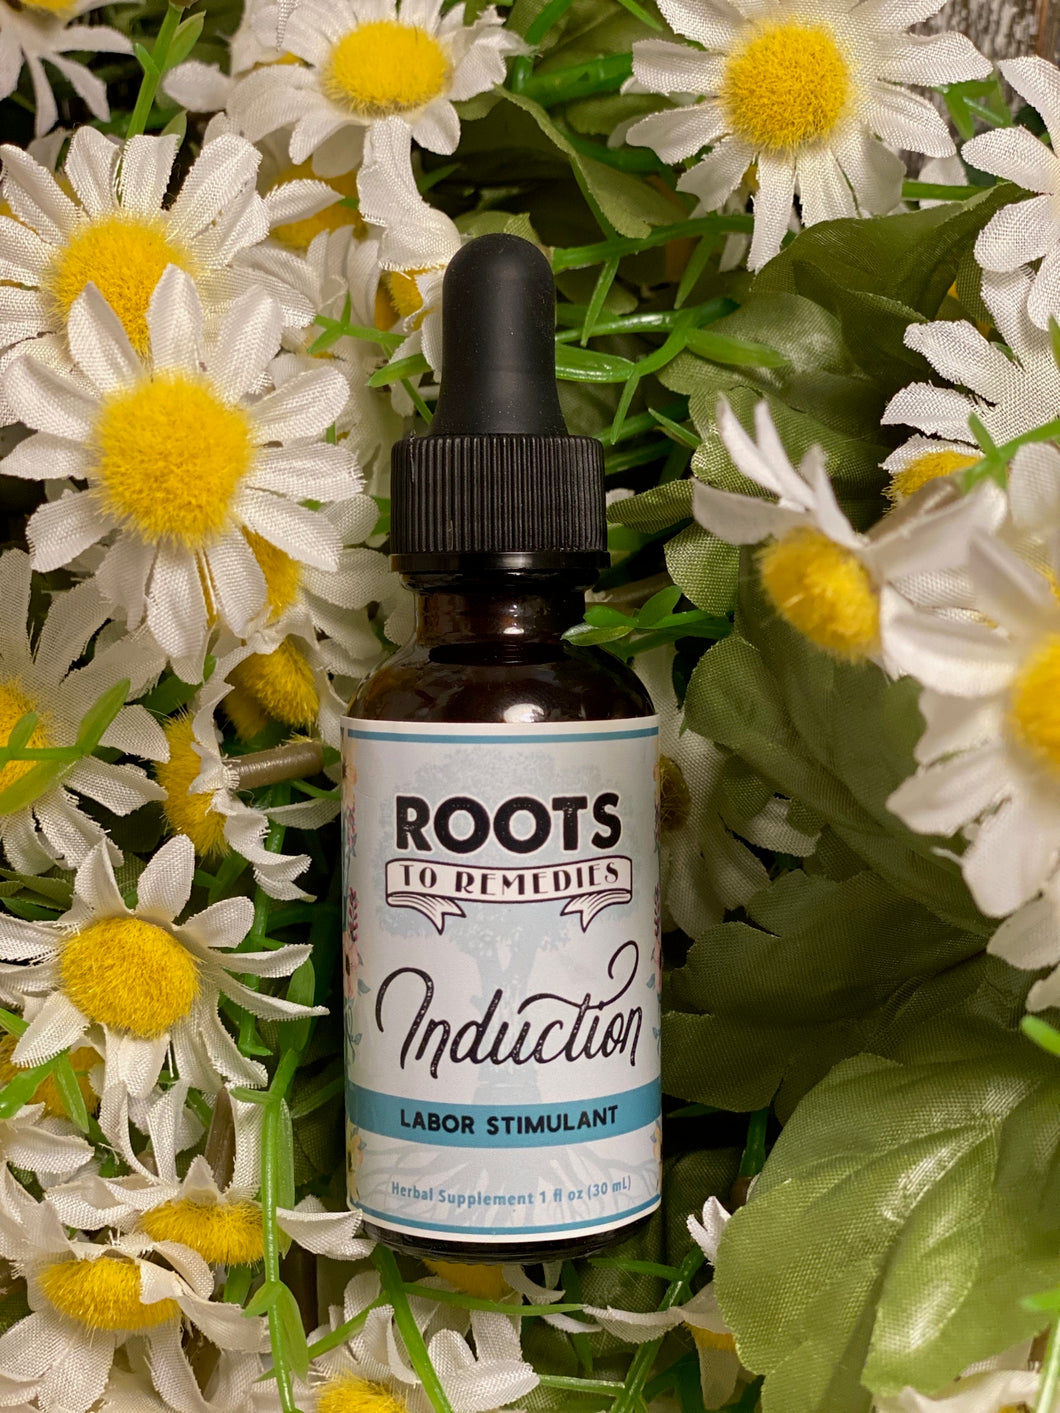 Induction-Labor Inducing Tincture by Roots and Remedies